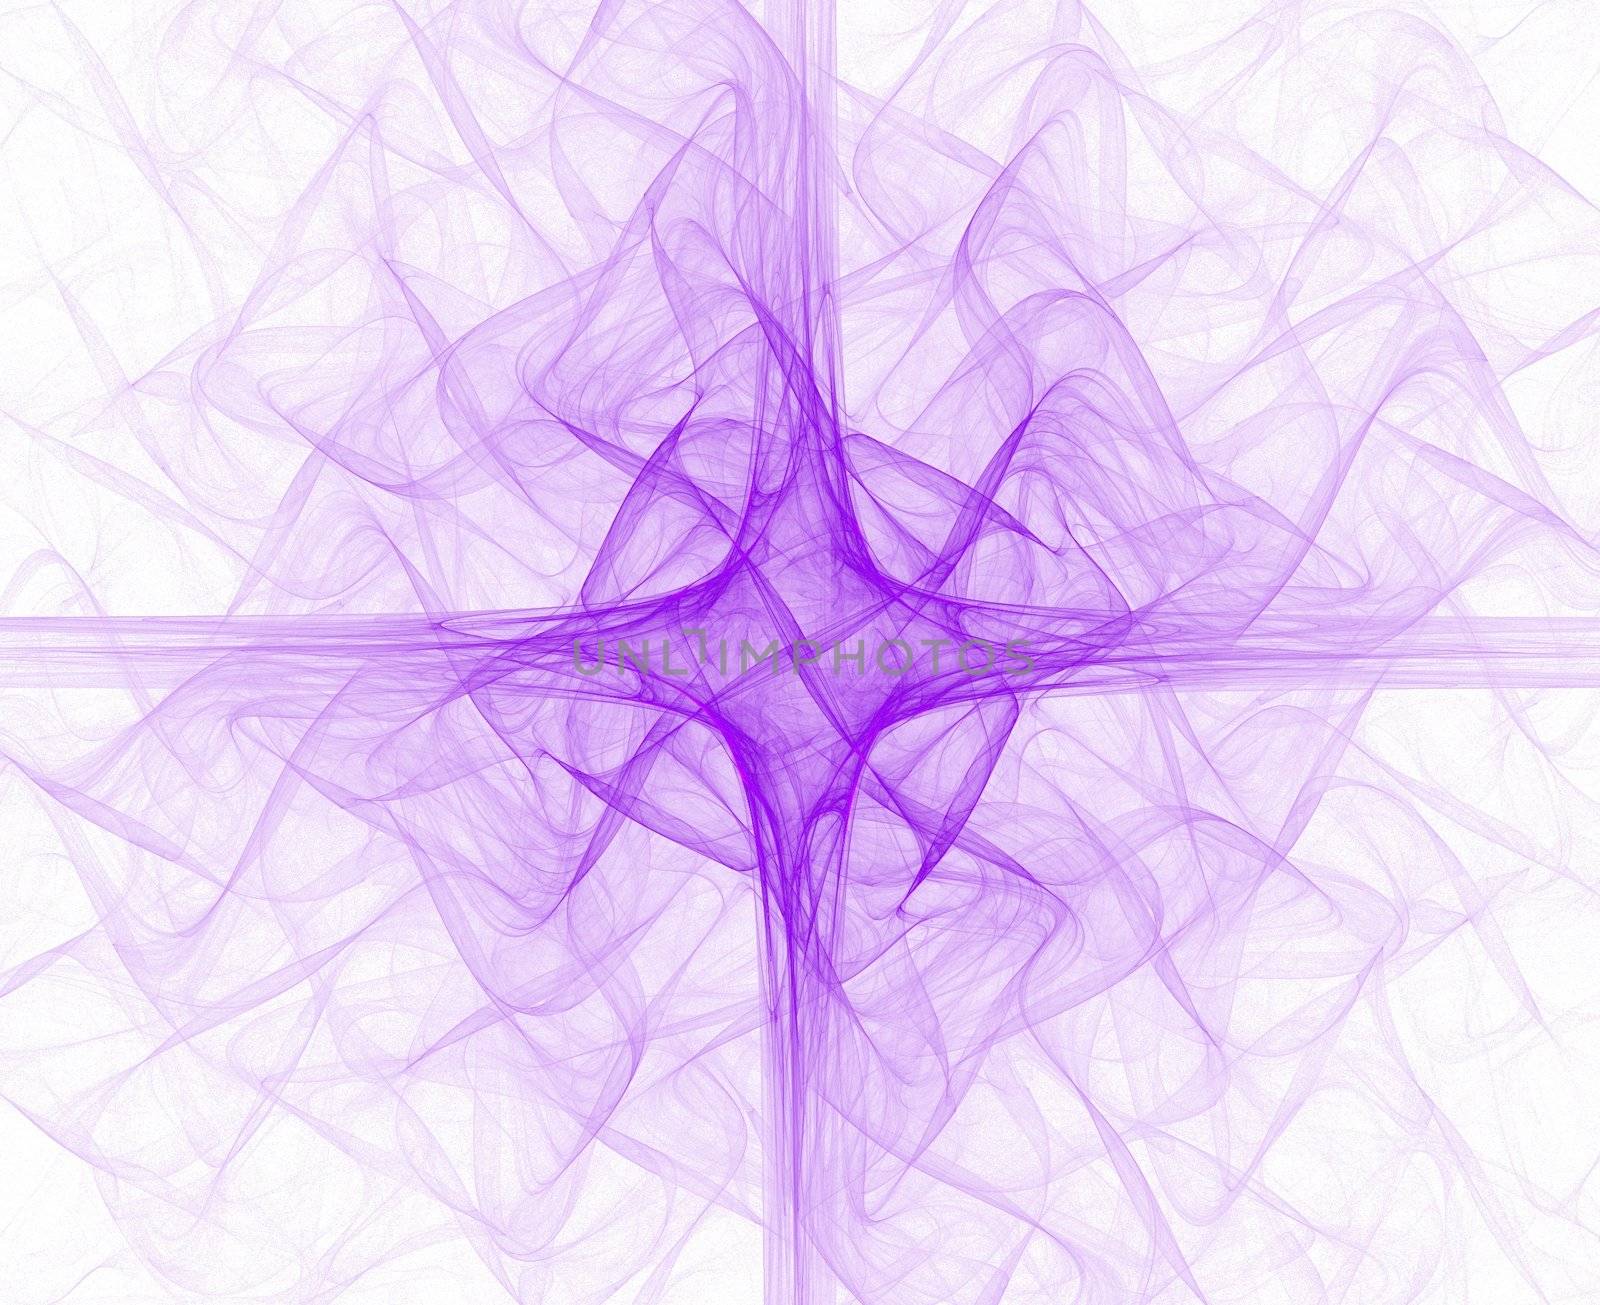  high res flame fractal forming a modern liturgical cross, keywords refer to use during church year
